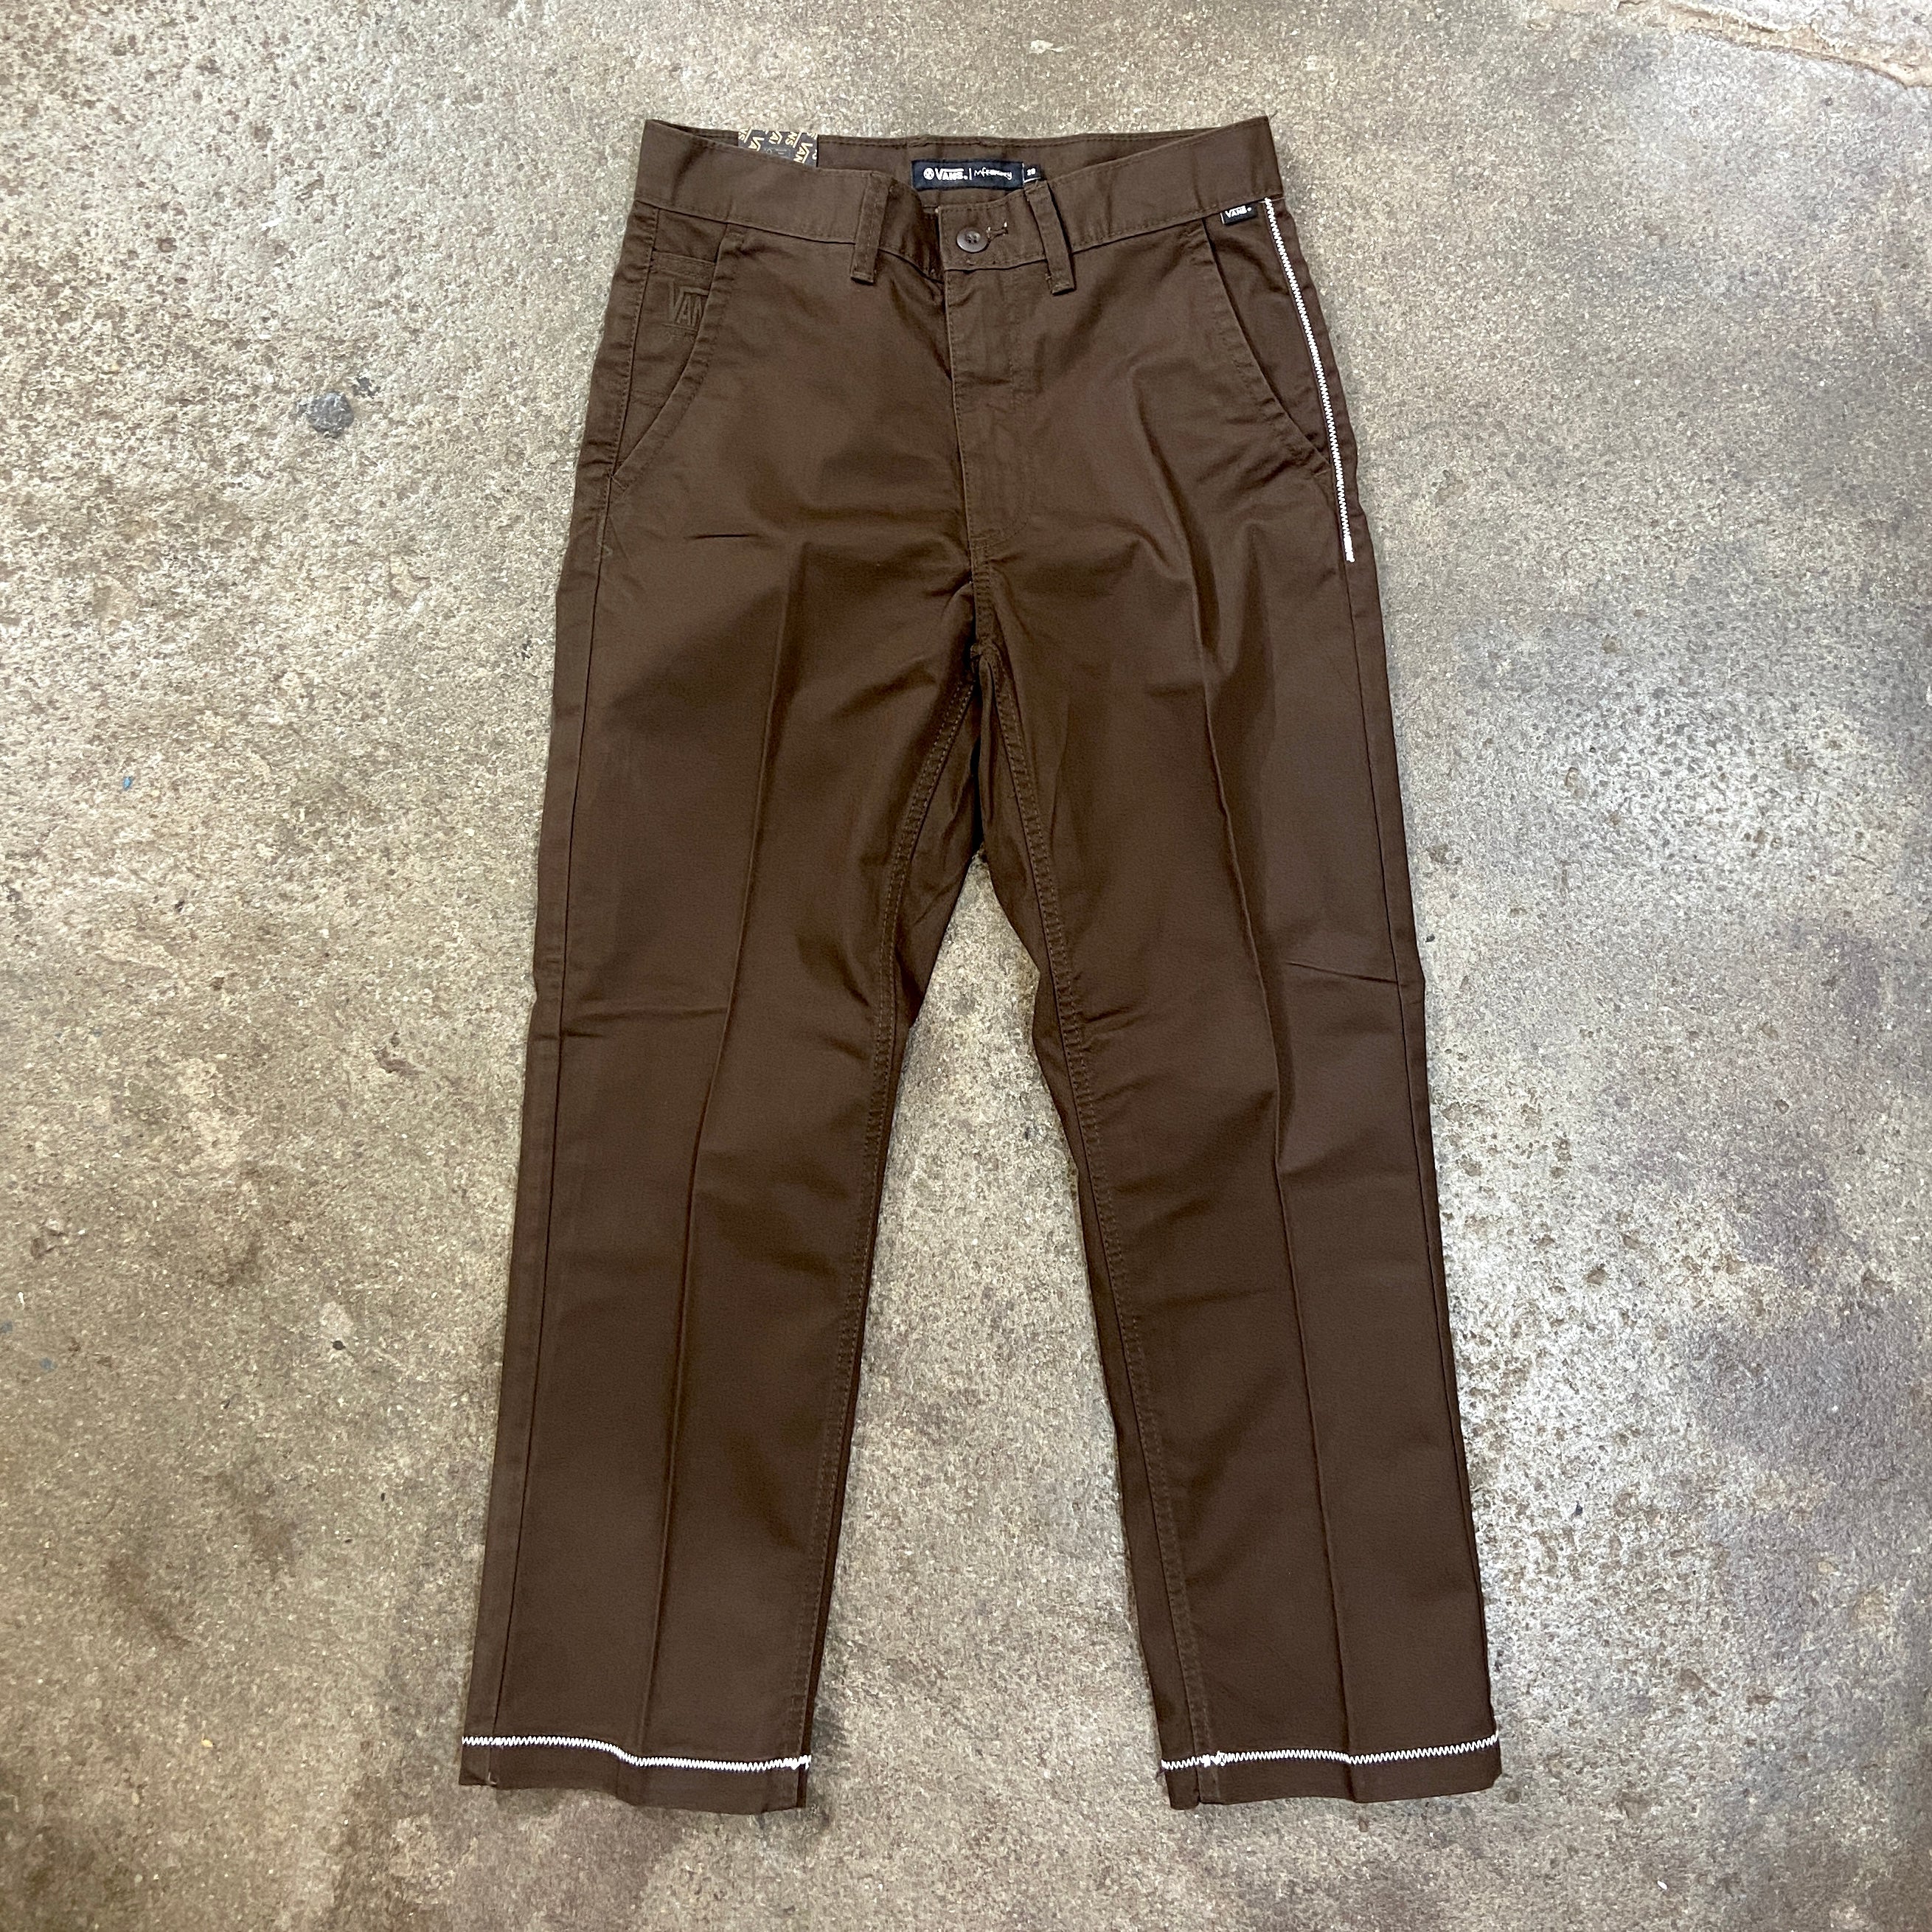 Vans' 'Authentic Chino Glide Pro' Pants Are Rough, Rugged & Really, Really  Comfy | The Berrics